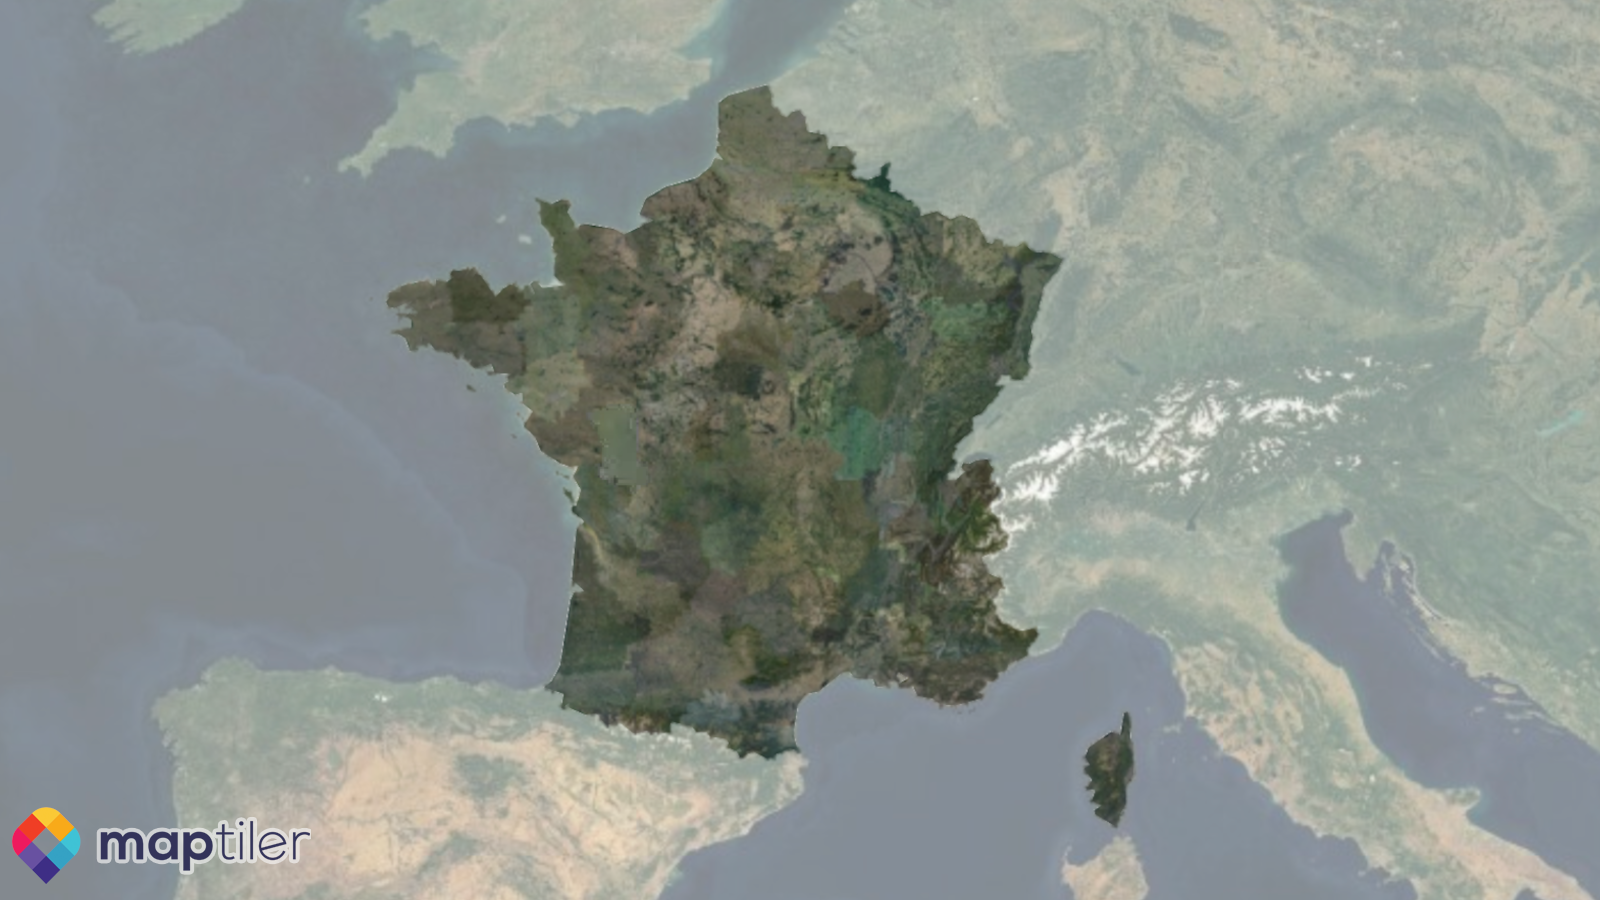 French imagery ready for your next project with MapTiler image